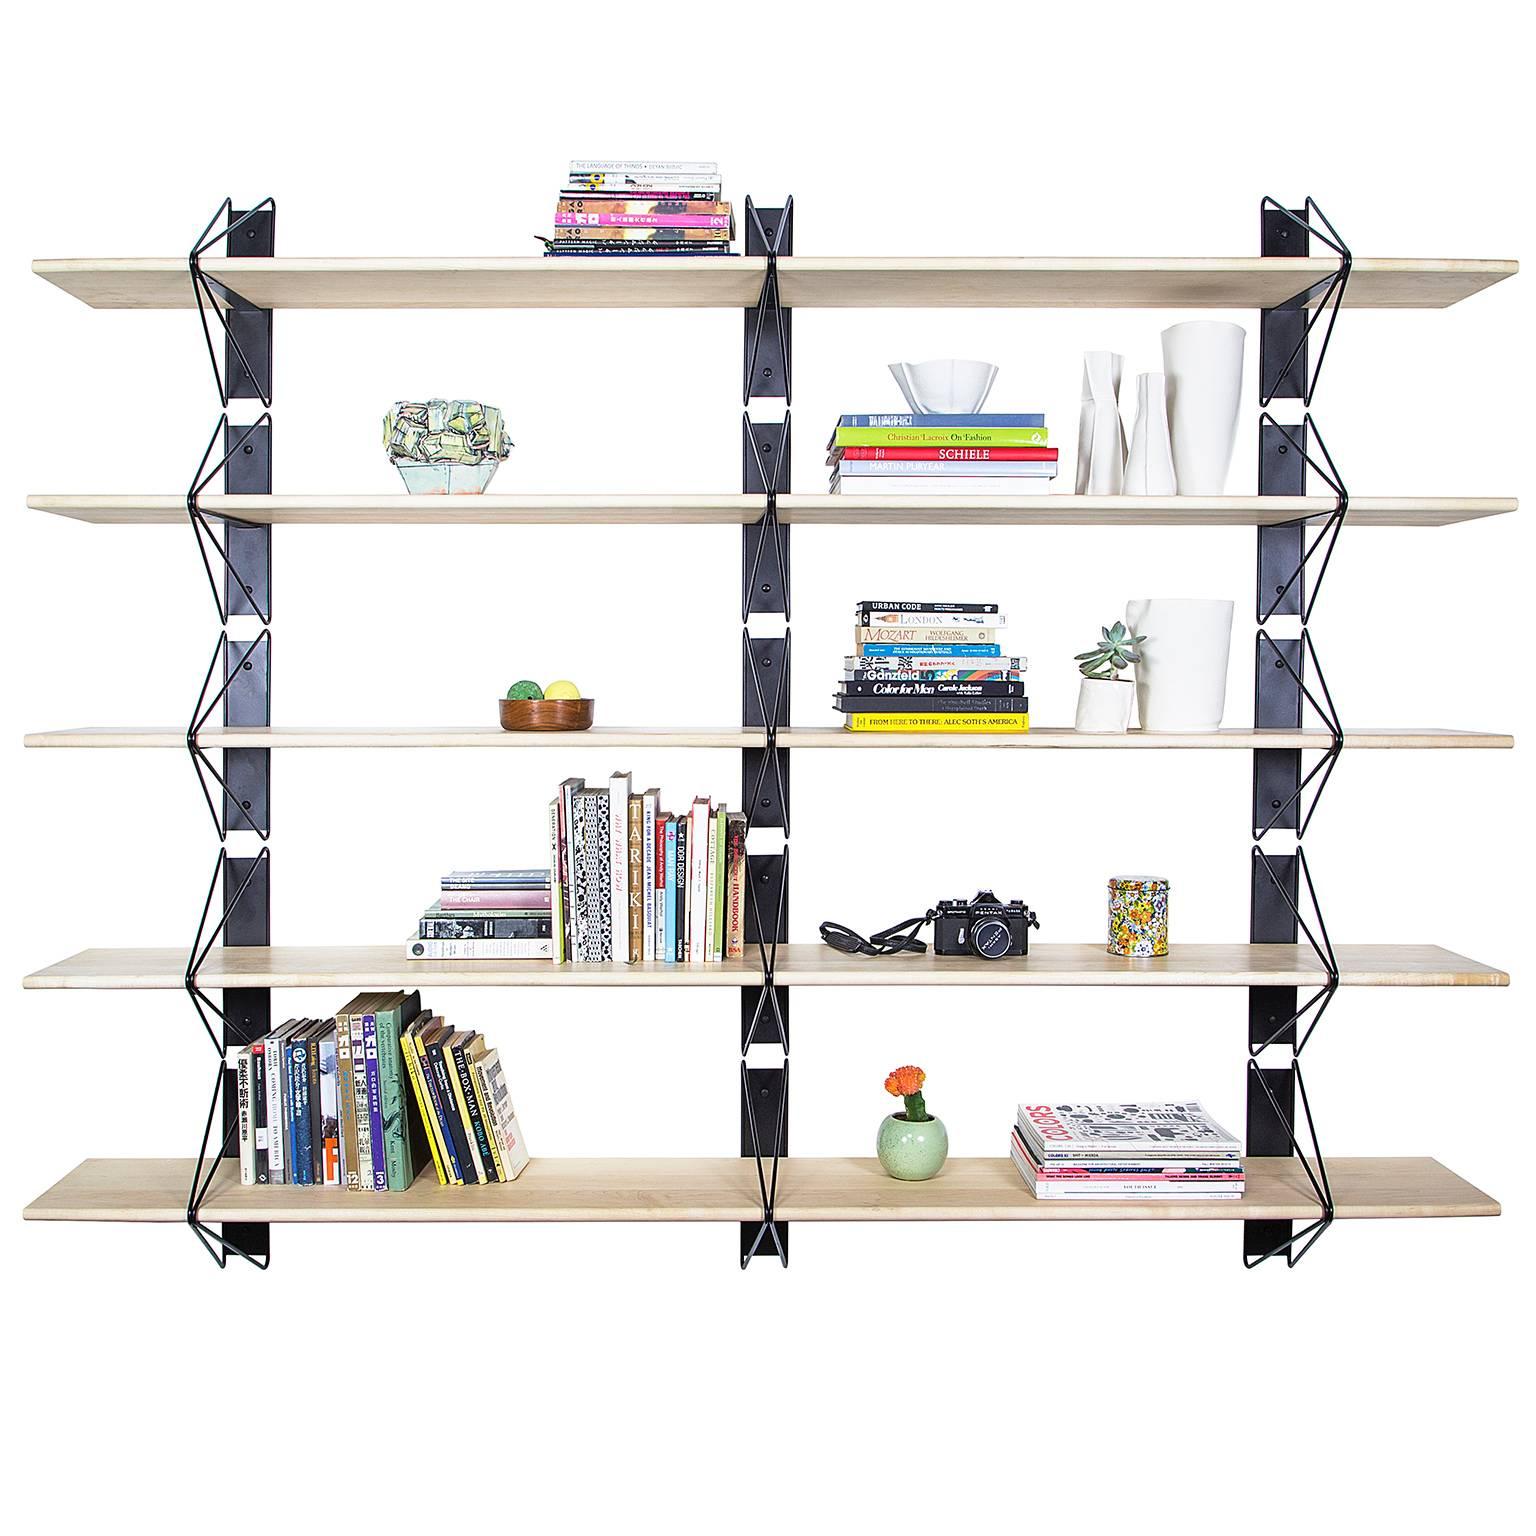 Oiled Set of 5 Strut Shelves from Souda, 116in, Black and Maple, Made to Order For Sale